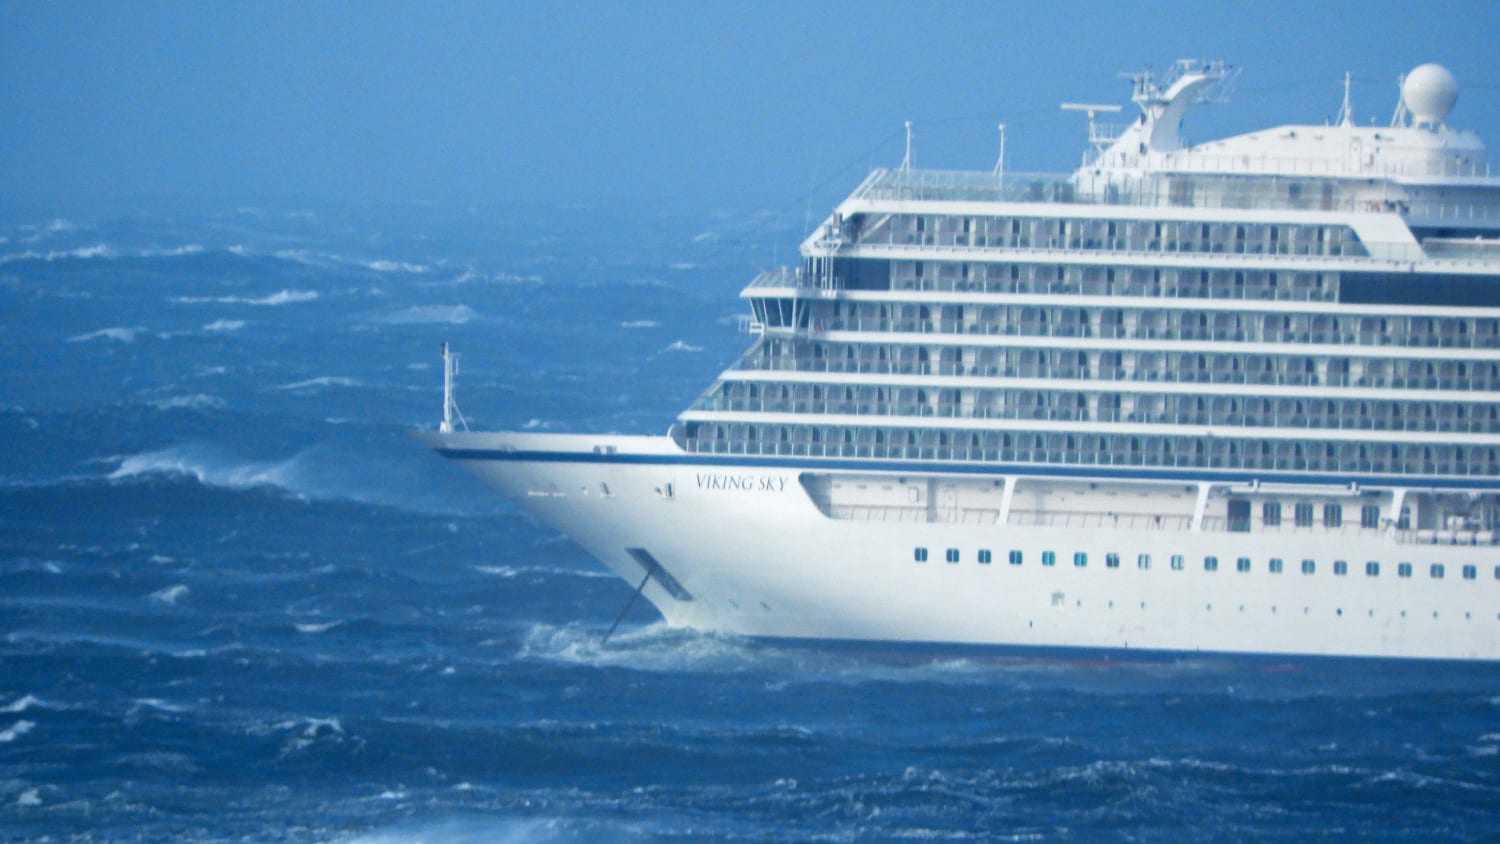 After Viking cruise ship rescue, passengers concerned about cruising safety